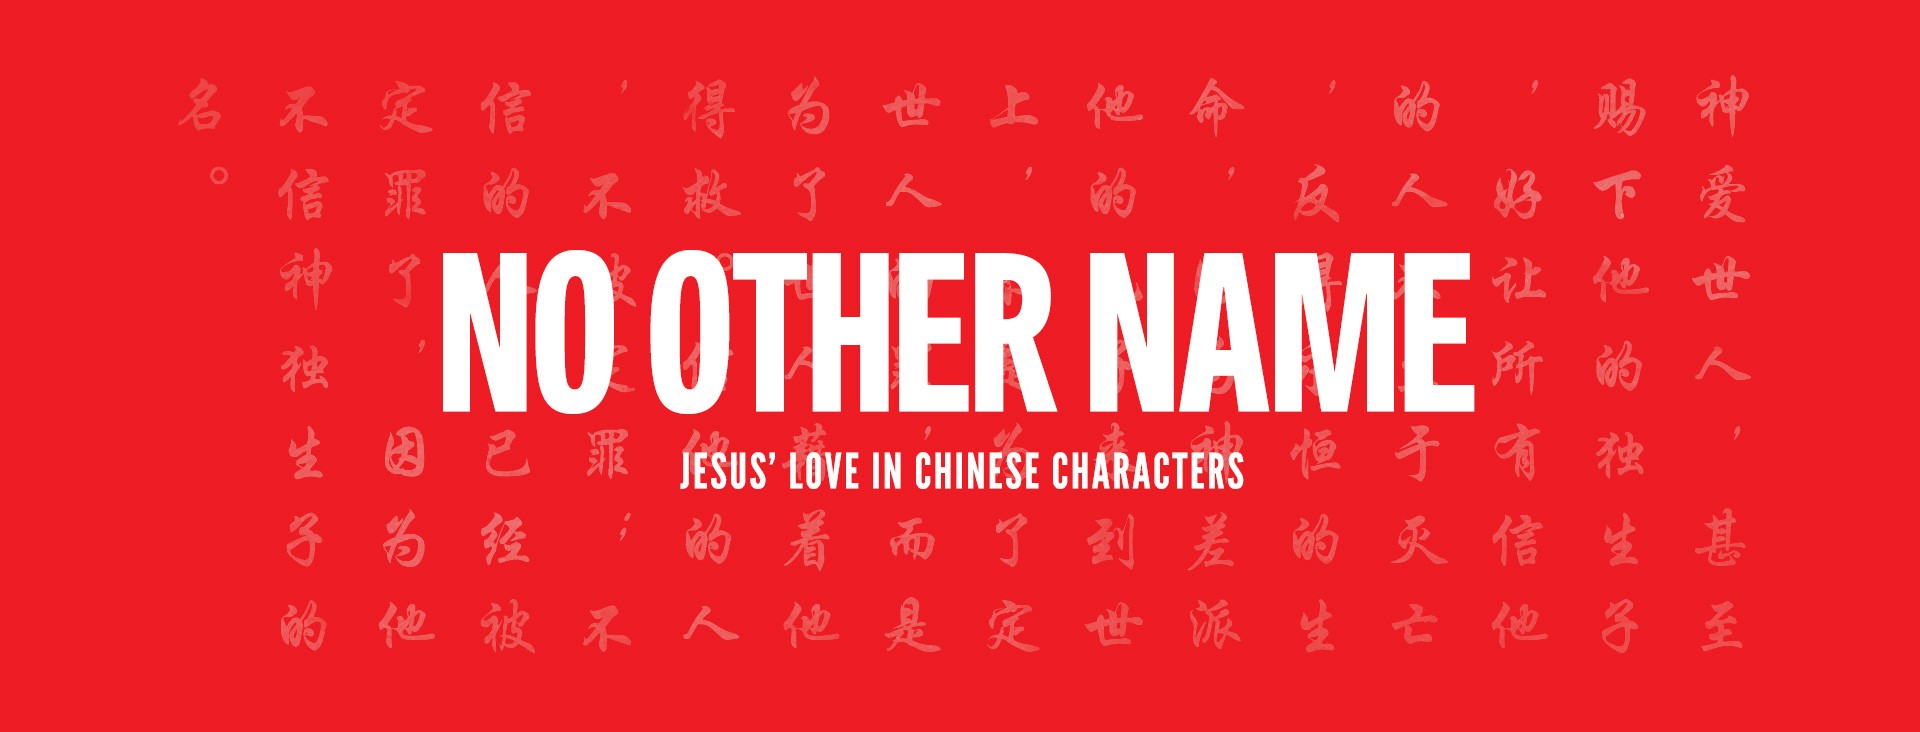 3:16 Church Singapore: Jesus' Love In Chinese Characters